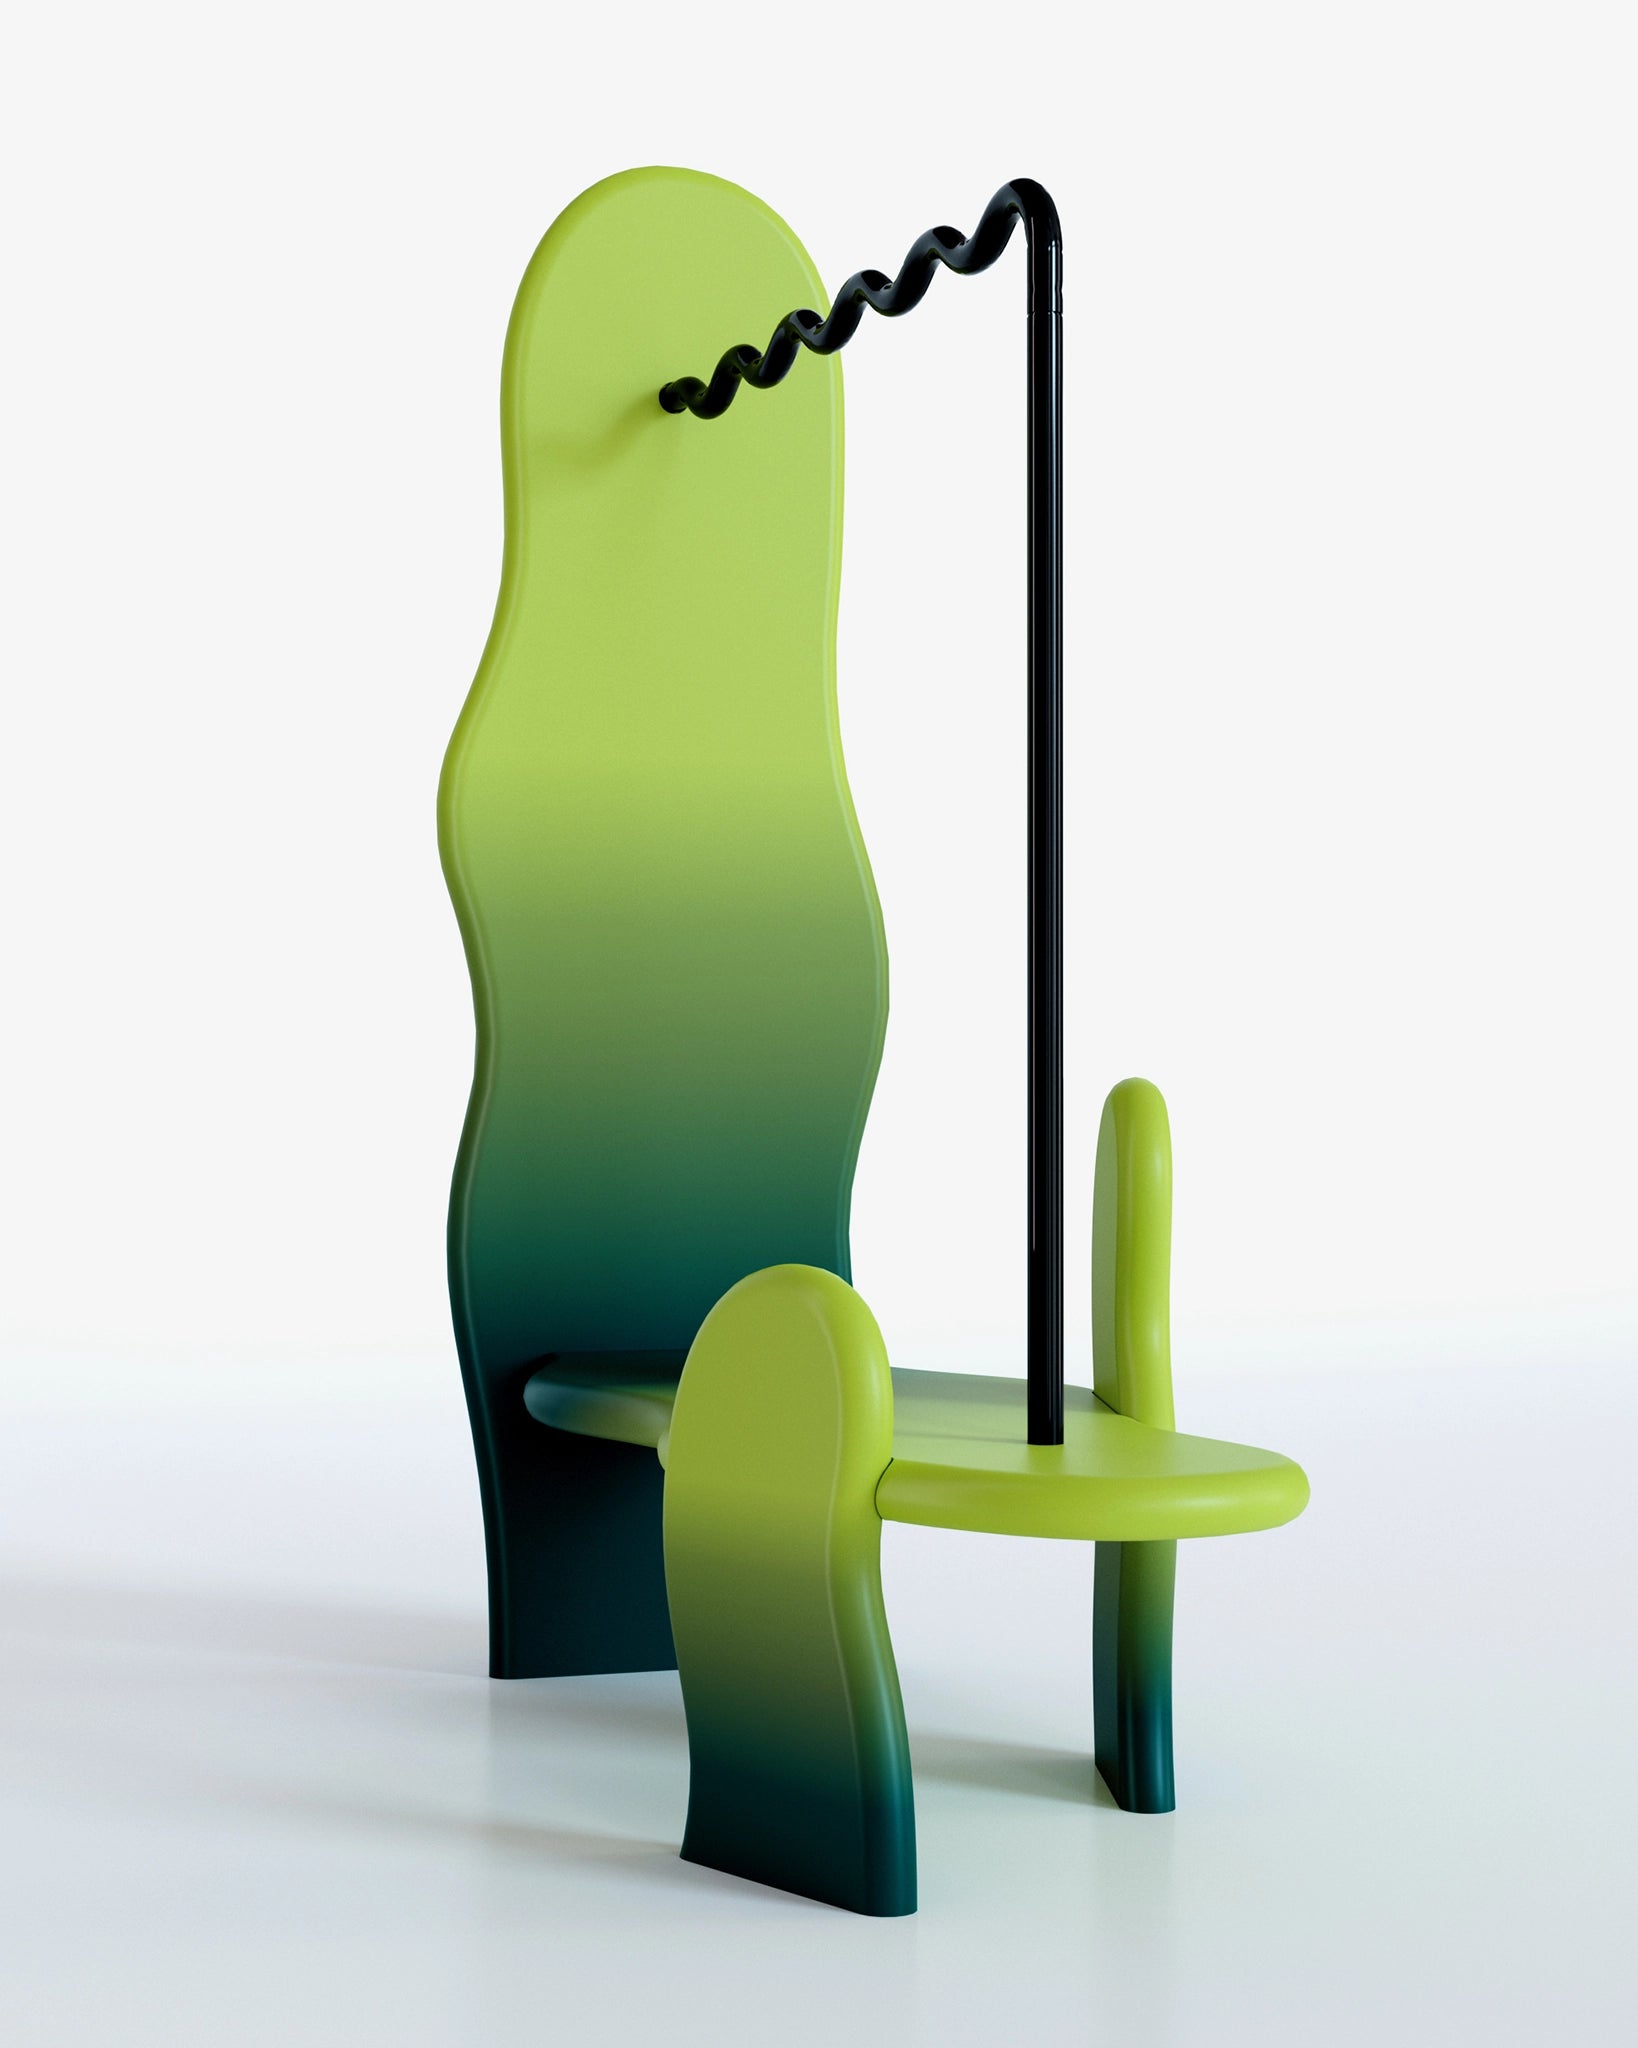 clothing rack with soft shapes and a wavy metal hanging tube, green gradient